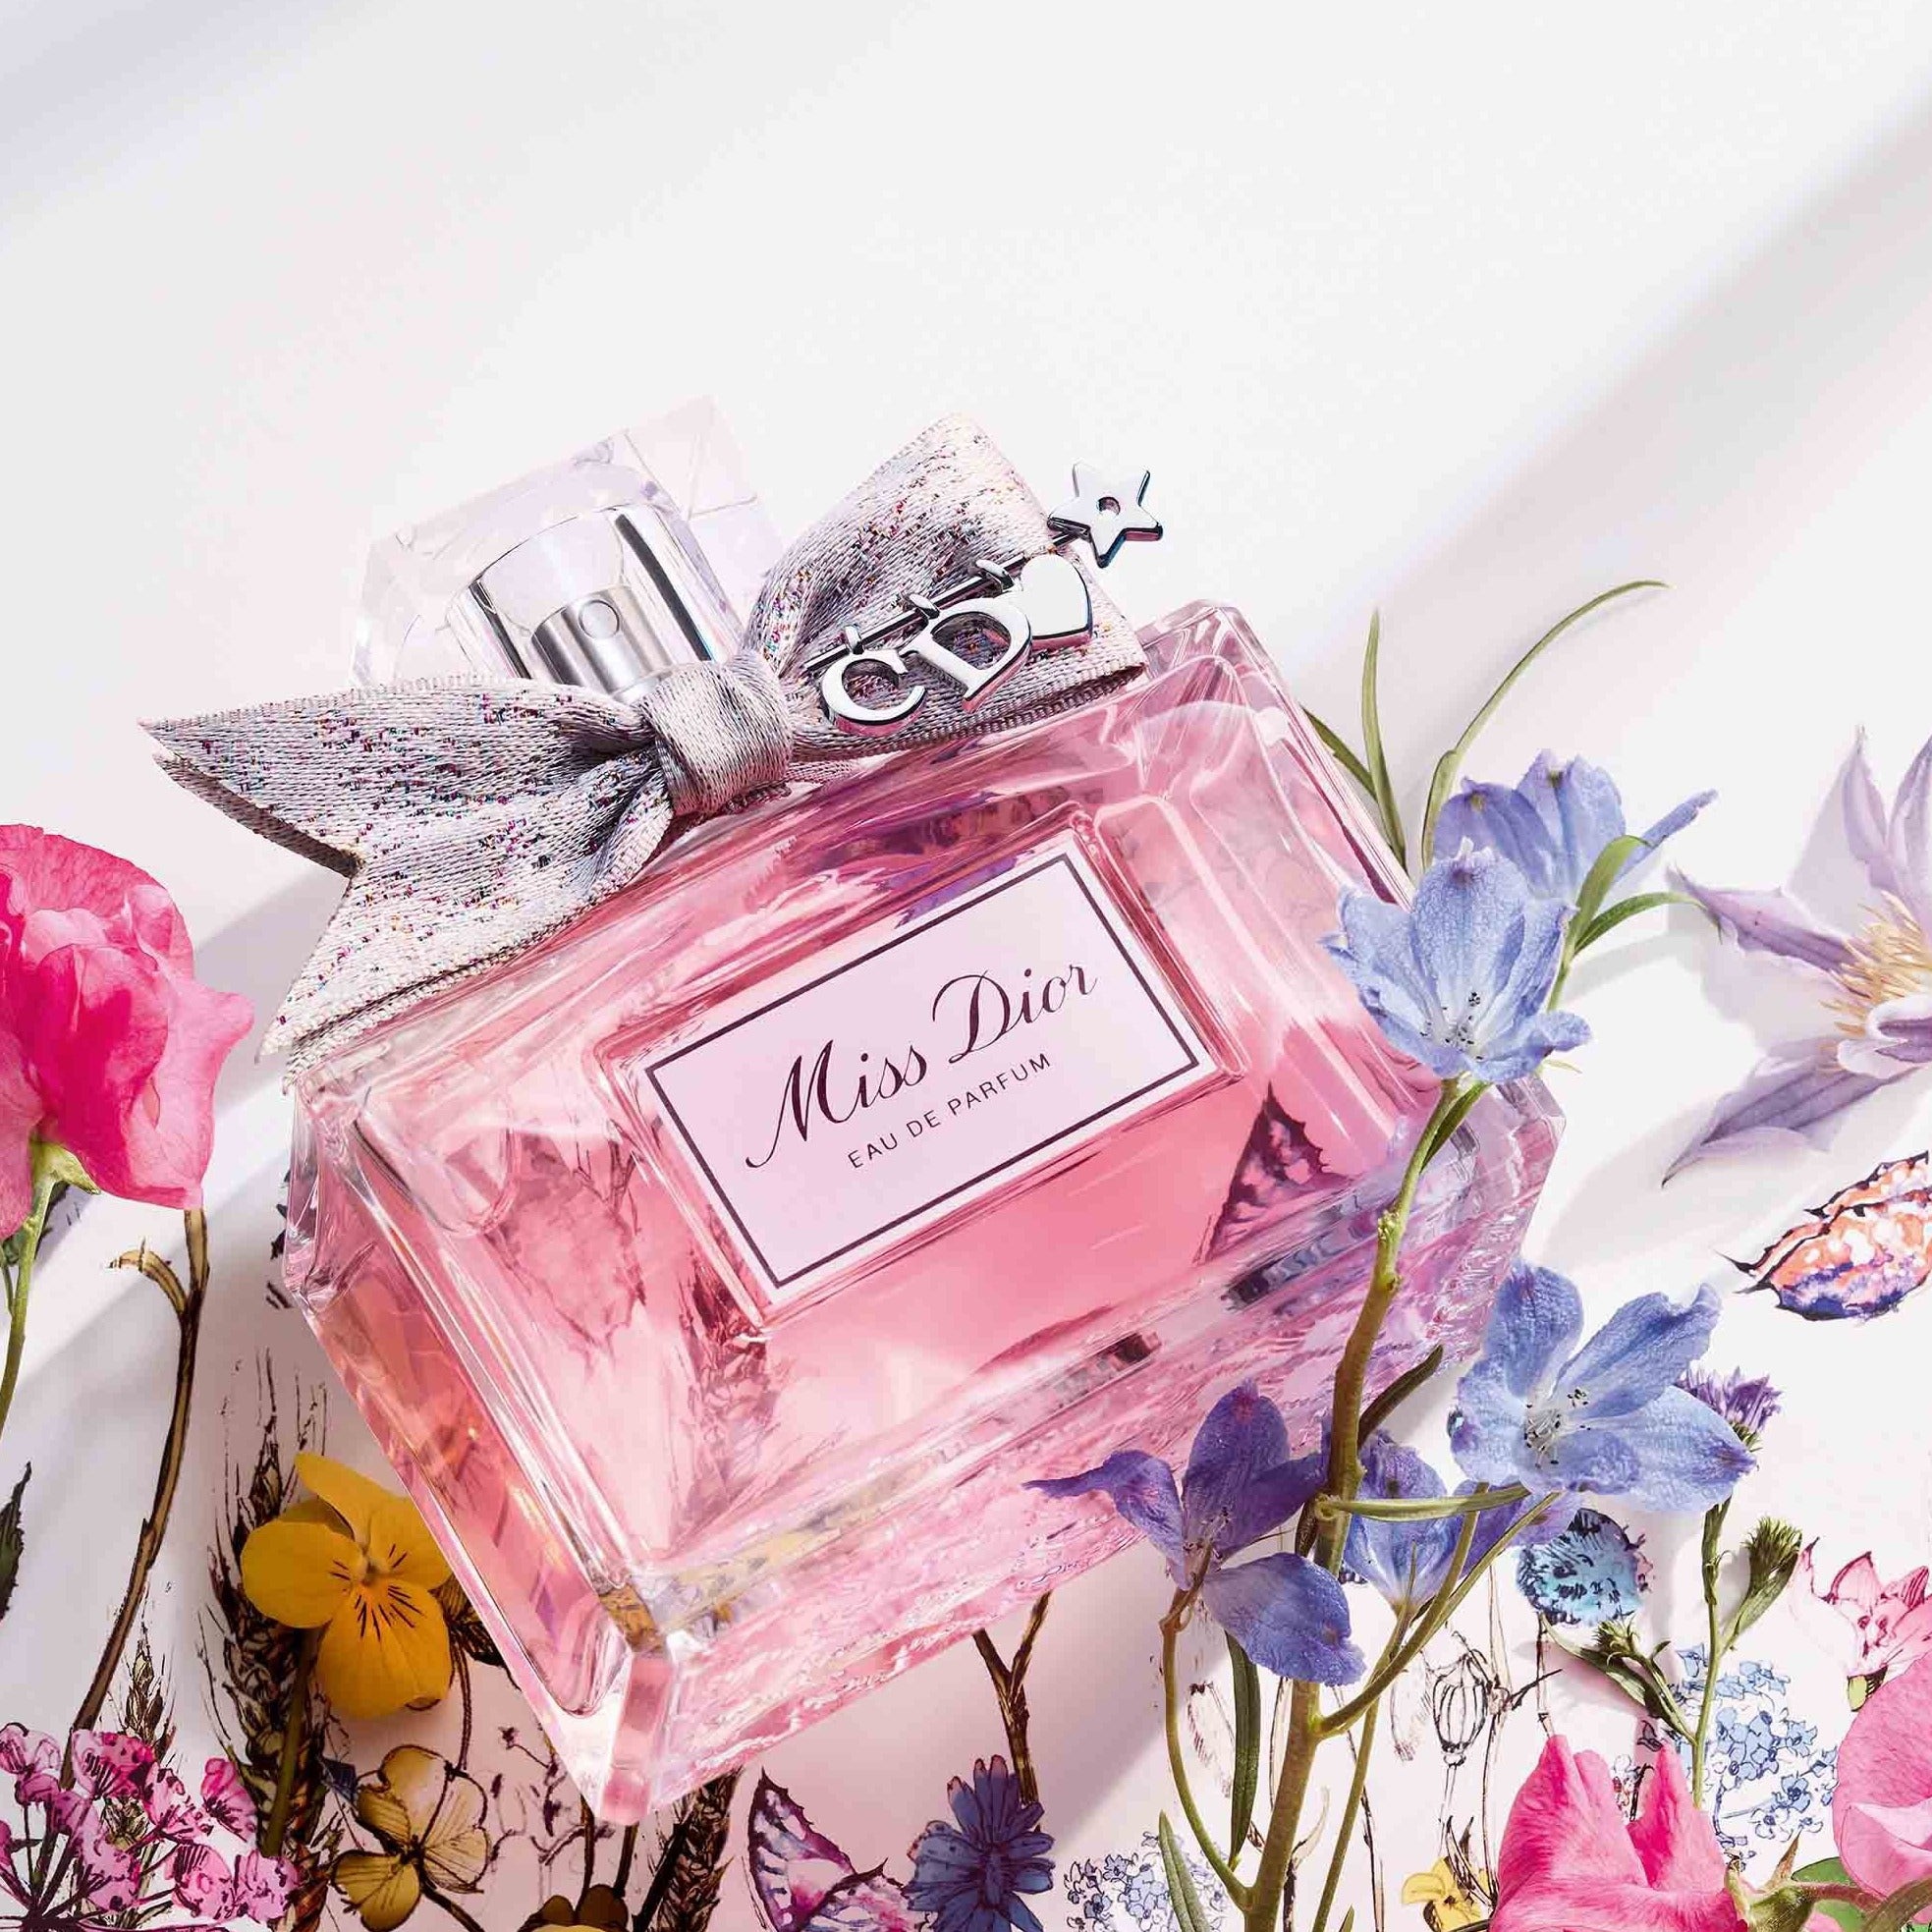 Parfums Christian Dior World of Pure Beauty pop-up reinvents